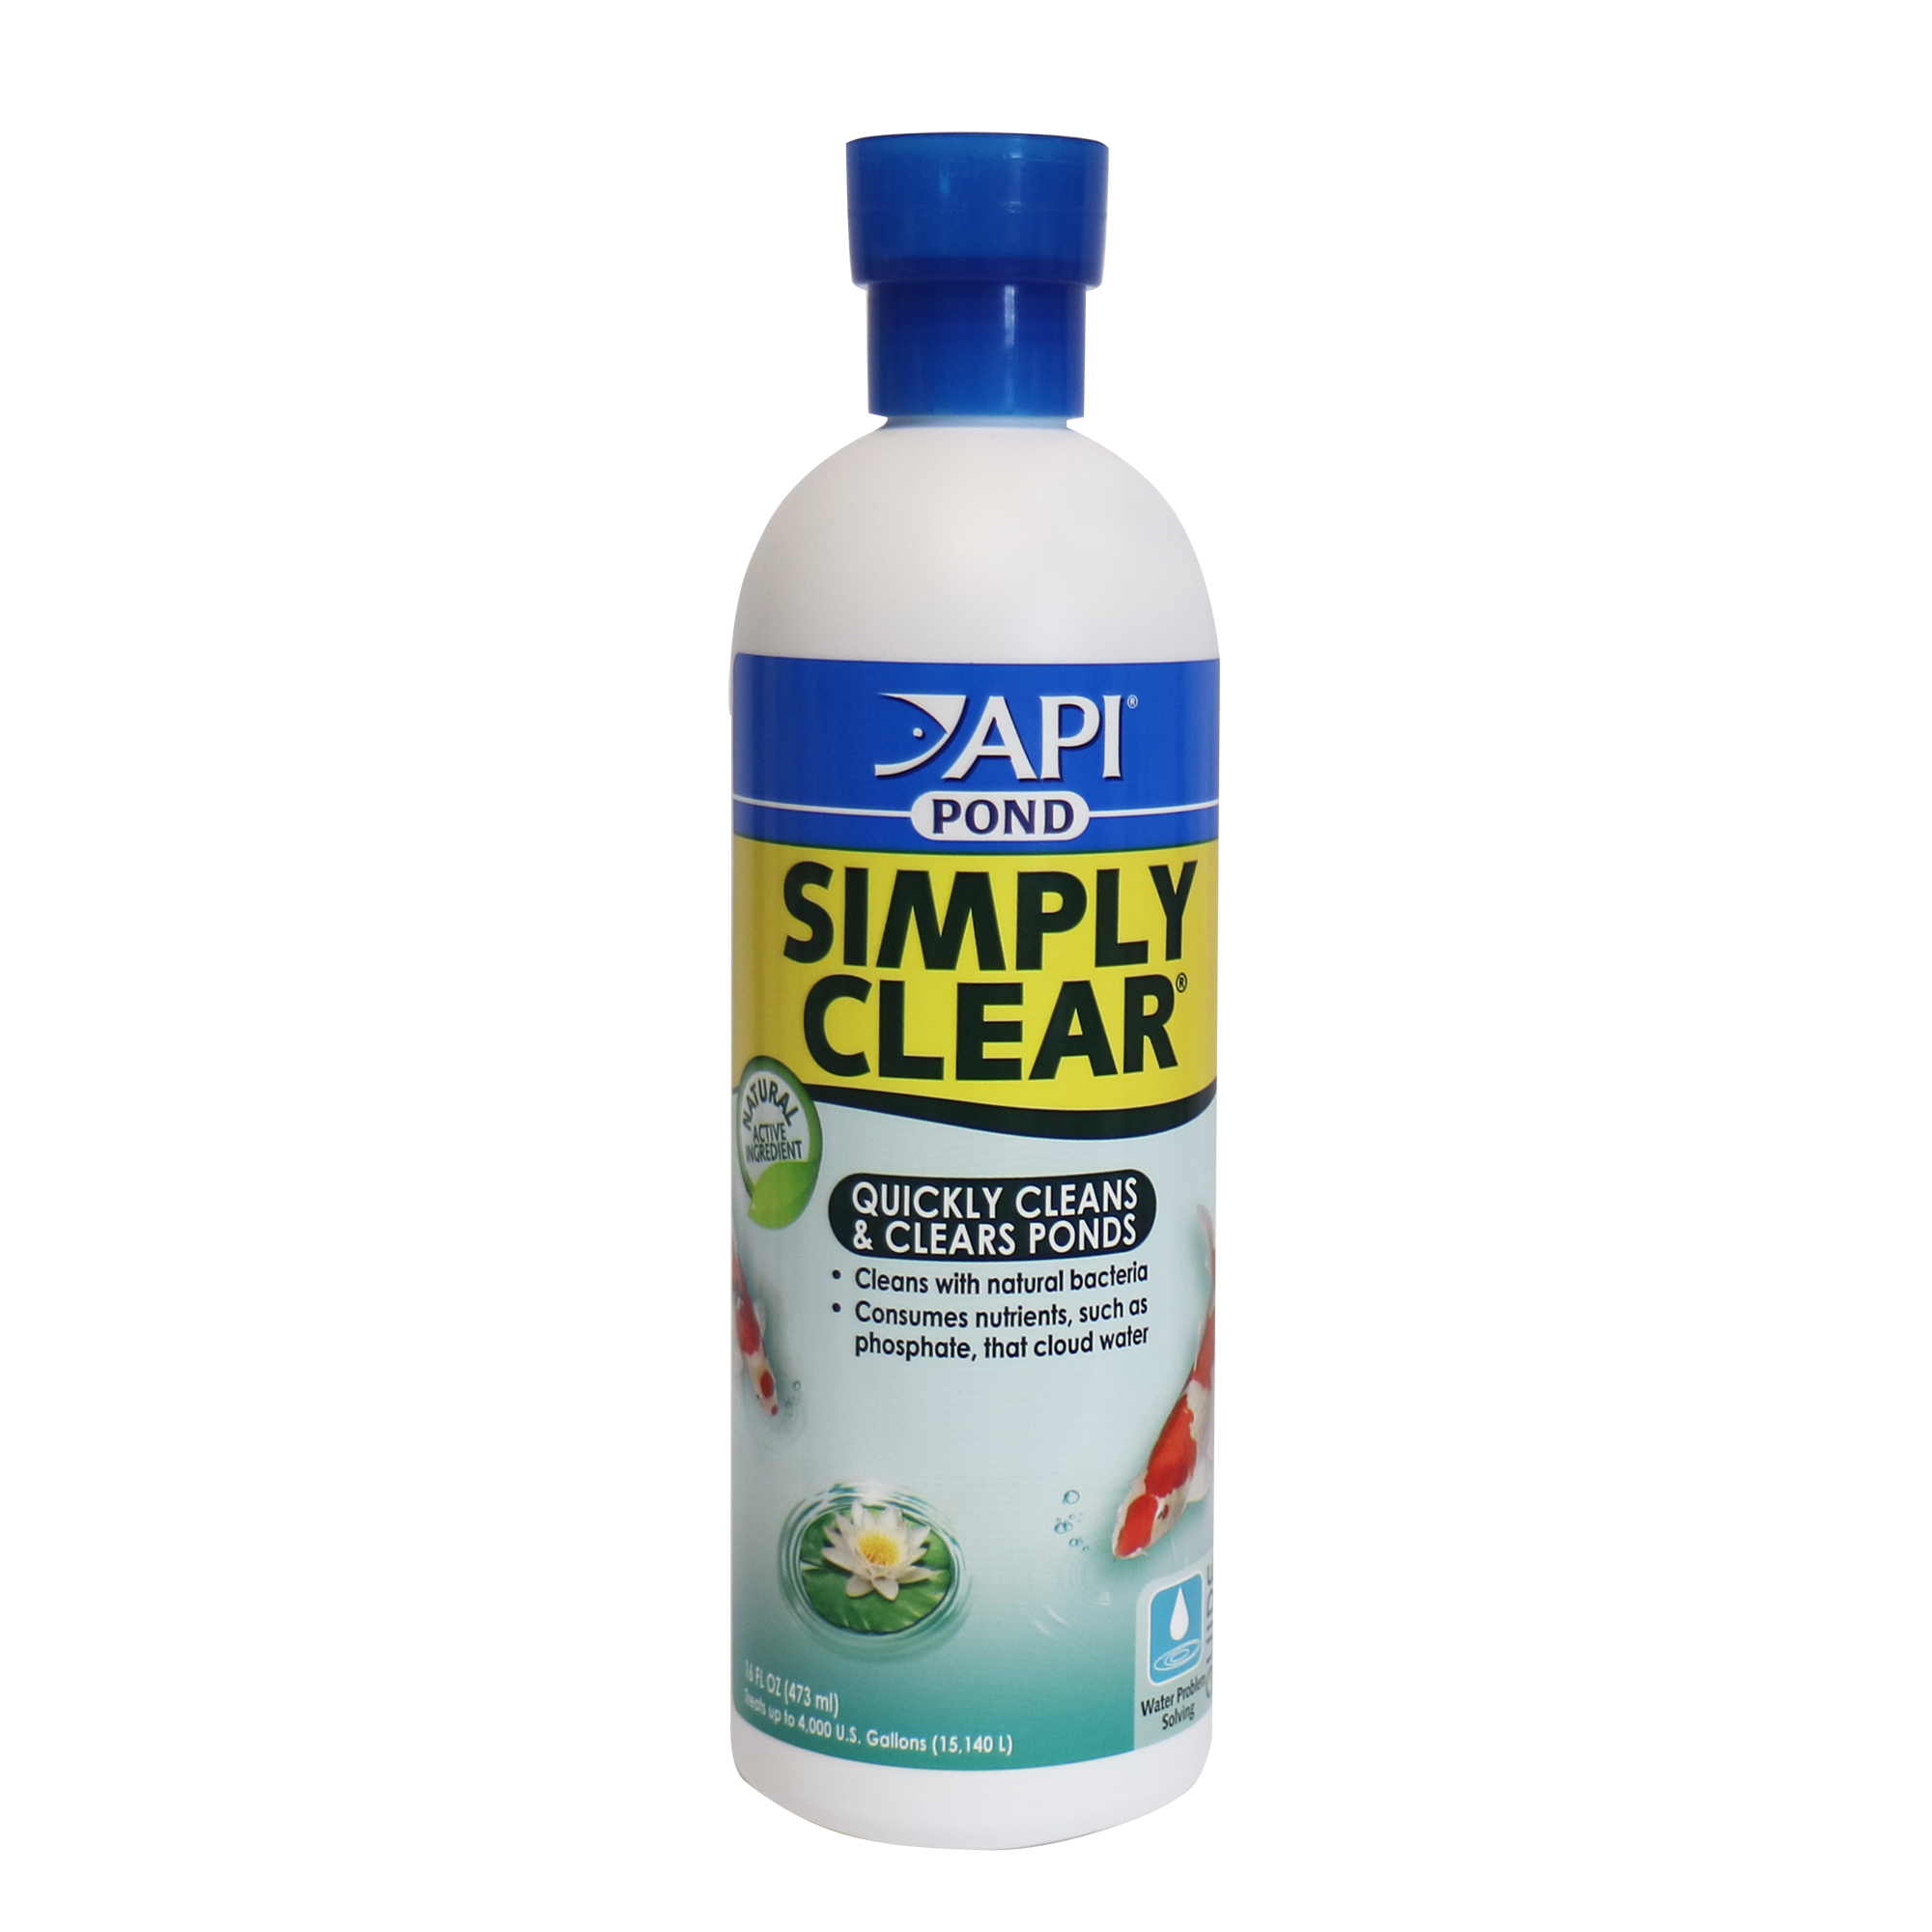 POND SIMPLY CLEAR™